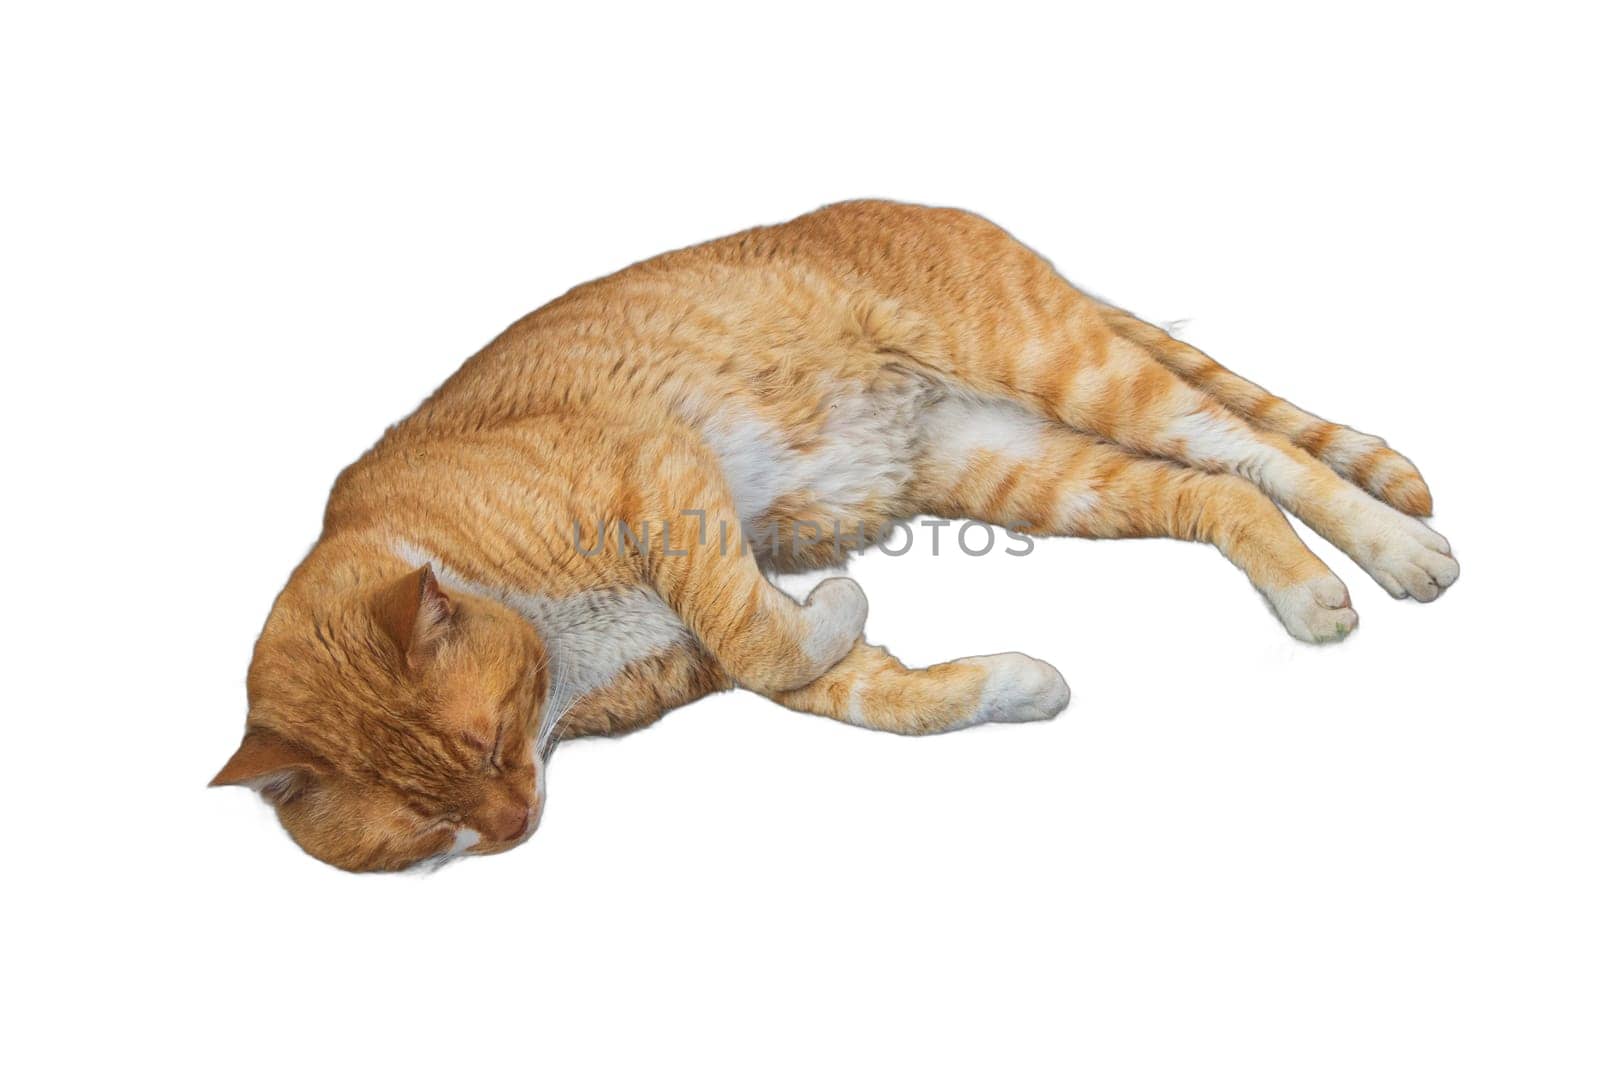 Isolated images of serene cats lounging in various poses. Perfect for pet-related designs, animal lover illustrations, and cozy graphics.